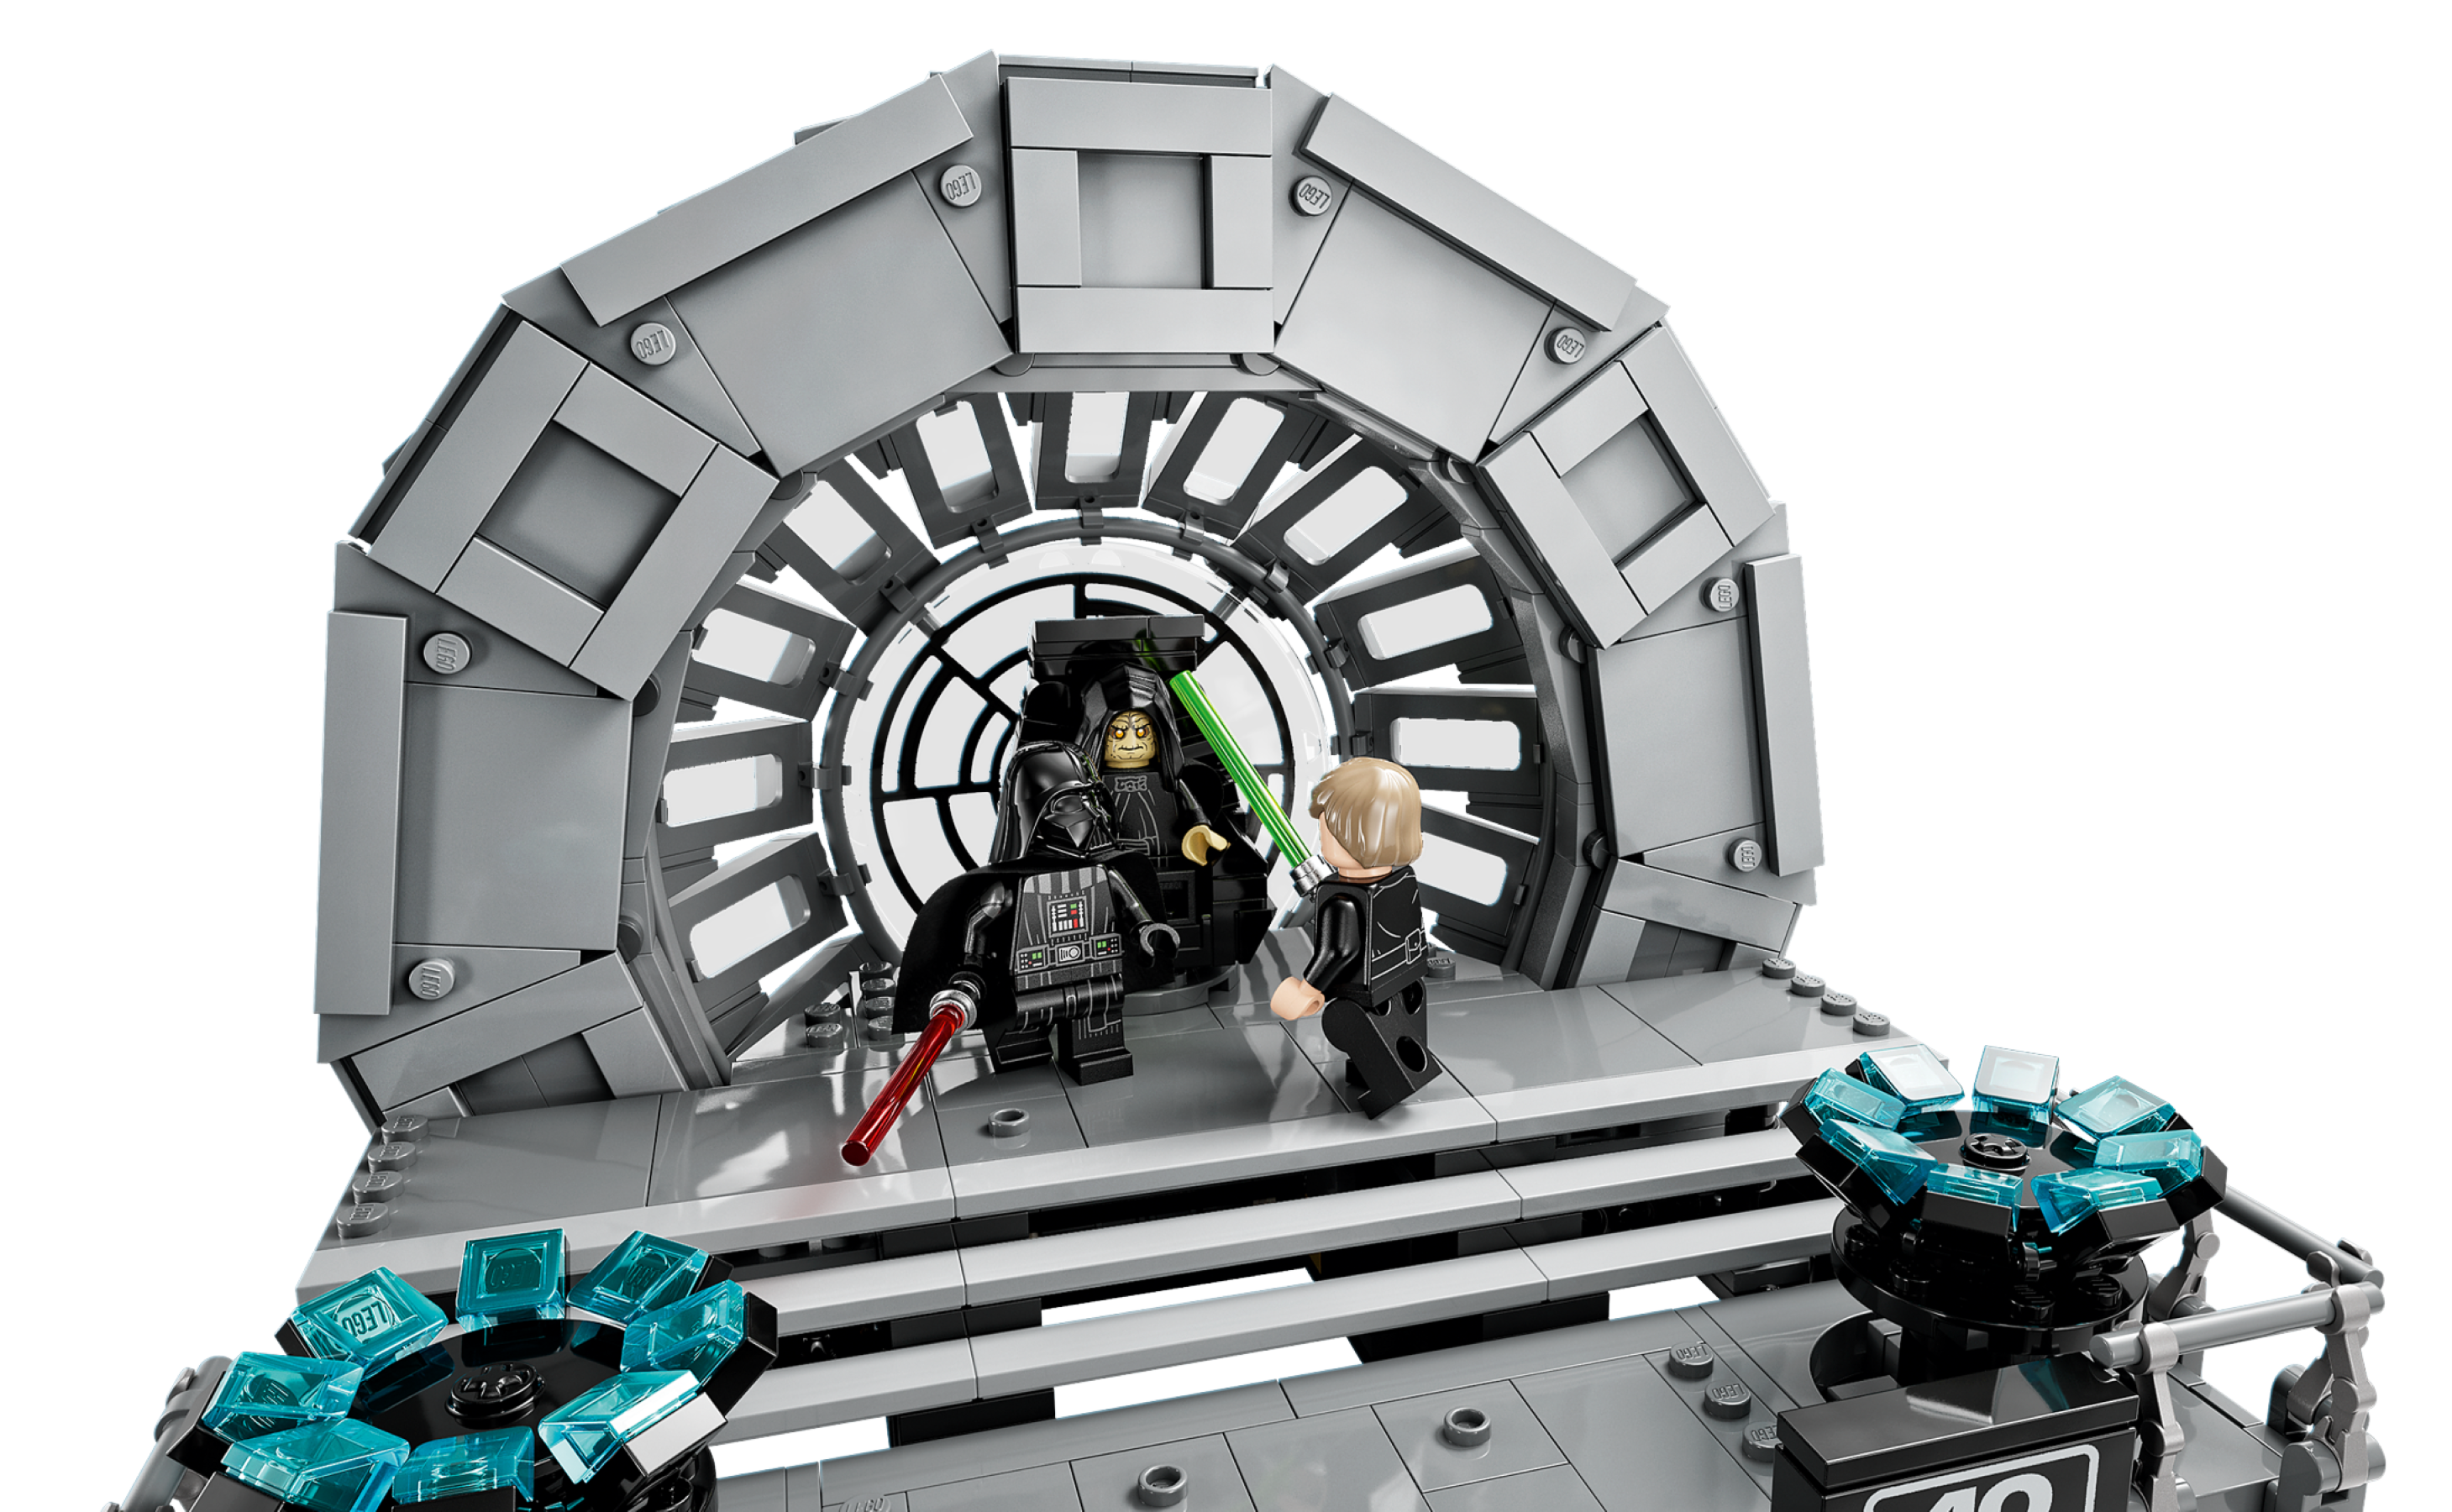 New LEGO Star Wars Diorama Sets Are Now Available - IGN